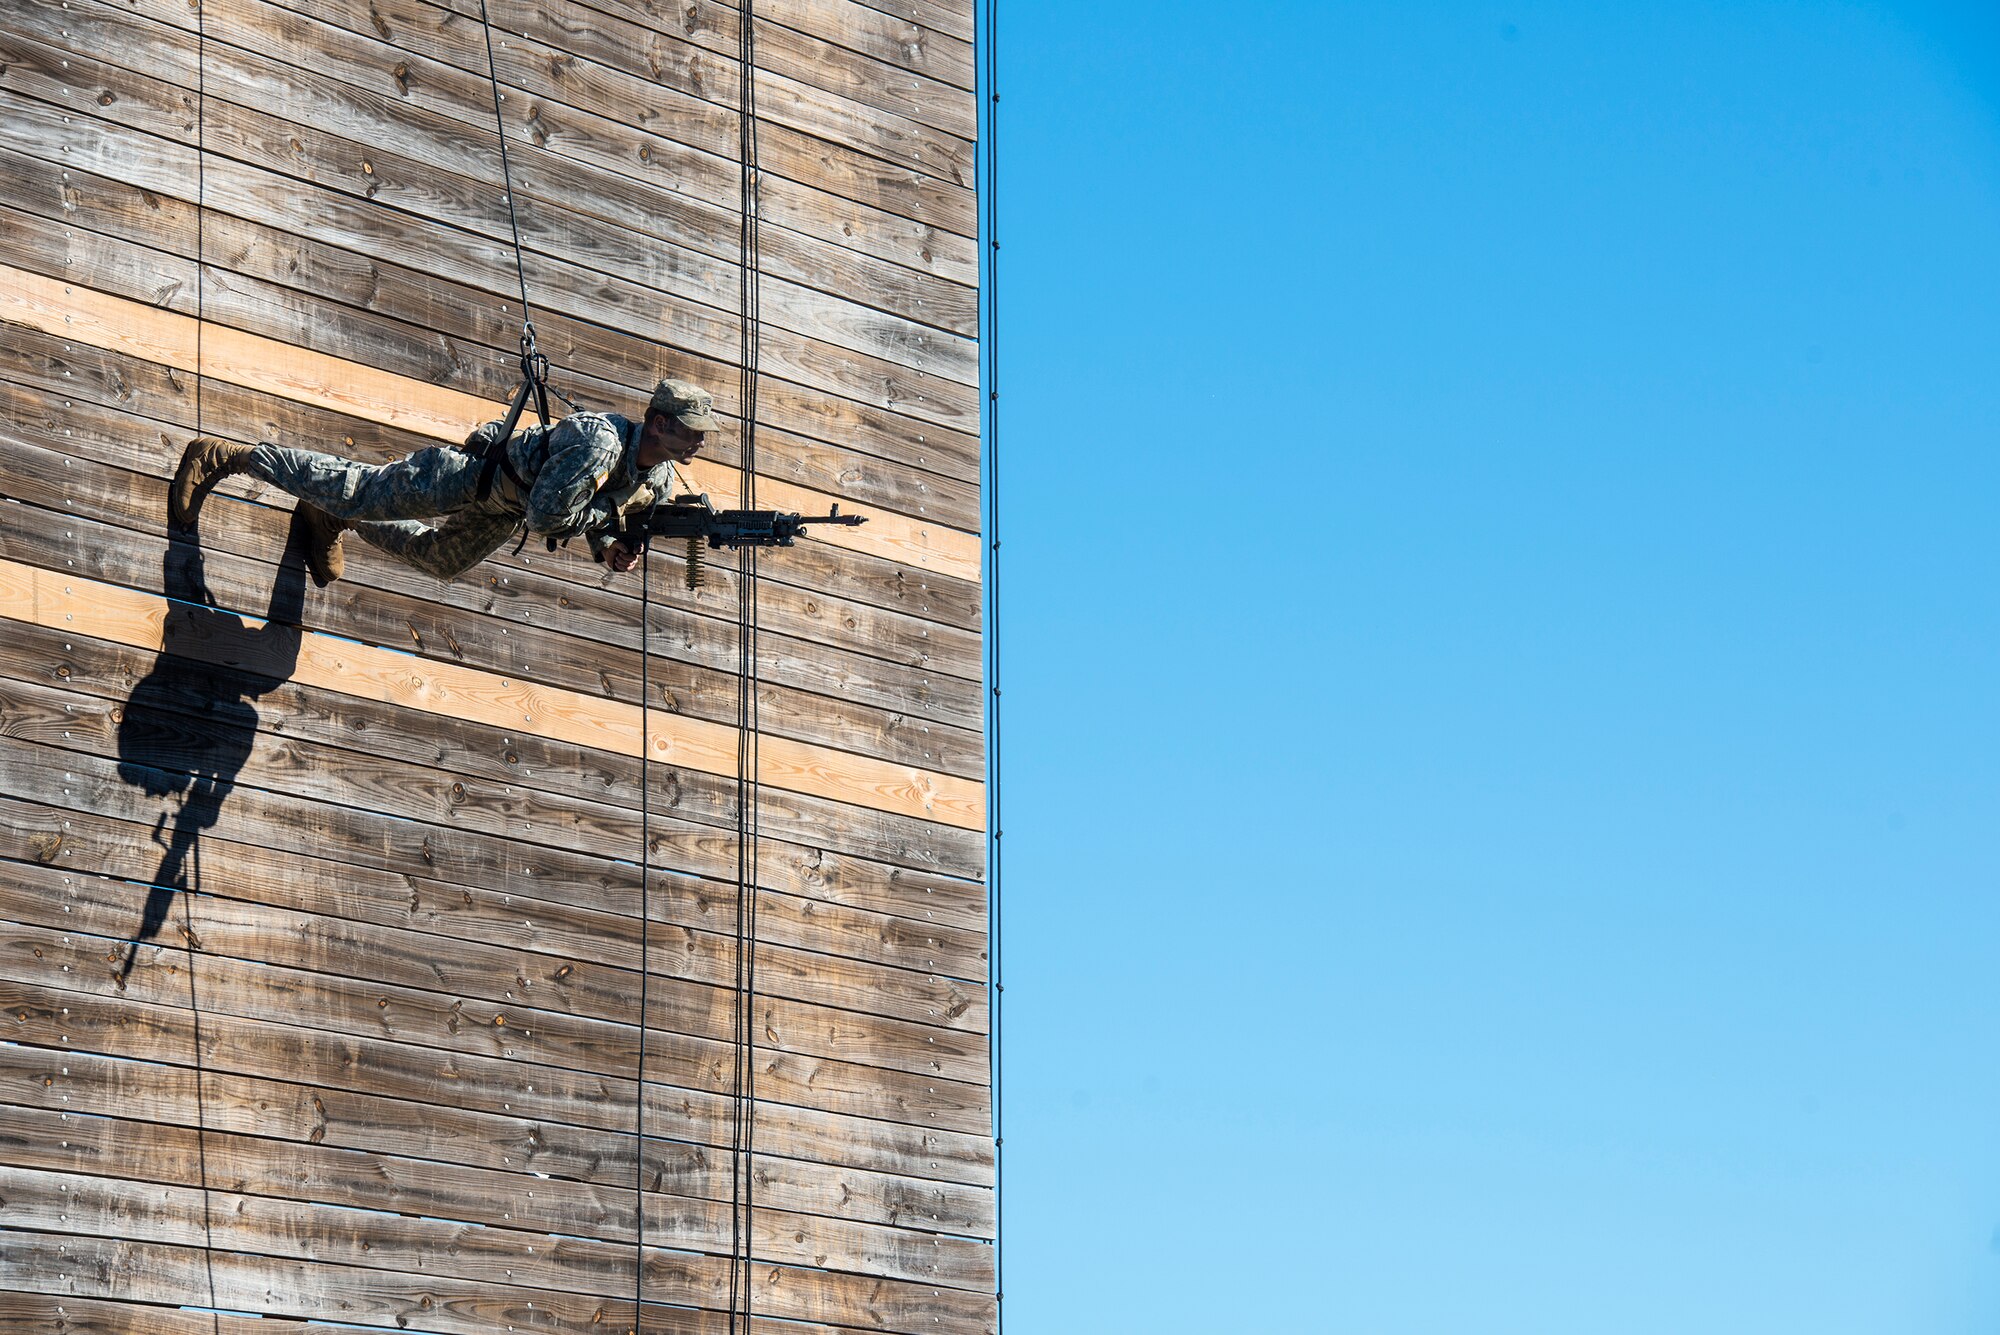 A U.S. Army Ranger carrying an M249 light machine gun rappels down a wall as part of a demonstration during a Ranger School graduation Oct. 17, 2014, at Fort Benning, Ga. Rangers are proficient in operations in urban, wooded, mountainous, jungle and swamp environments. (U.S. Air Force photo/Airman 1st Class Ryan Callaghan)